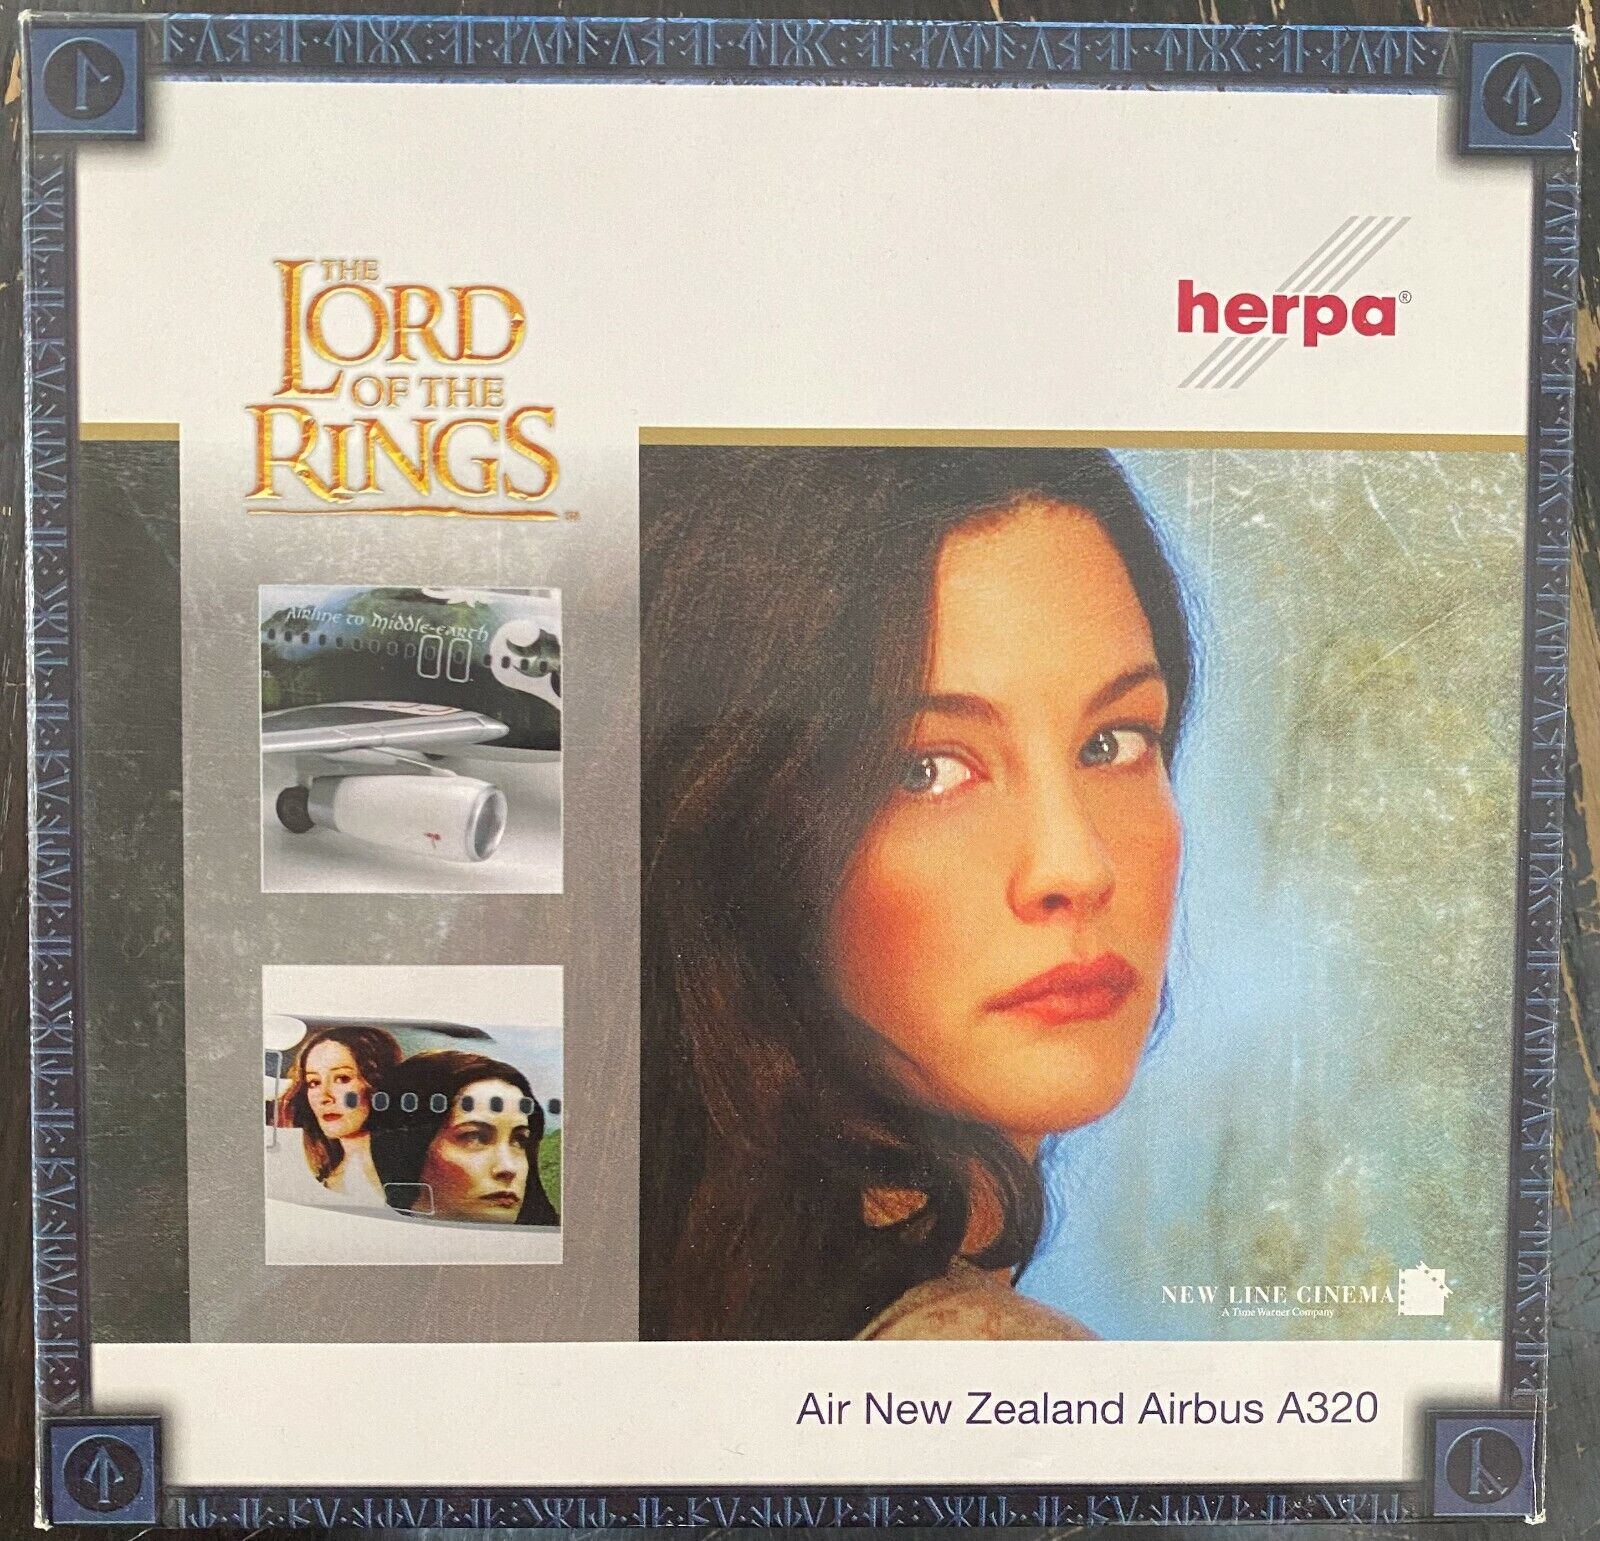 Herpa   Lord of the Rings    Air New Zealand   Airbus A320  1:200  Airplane